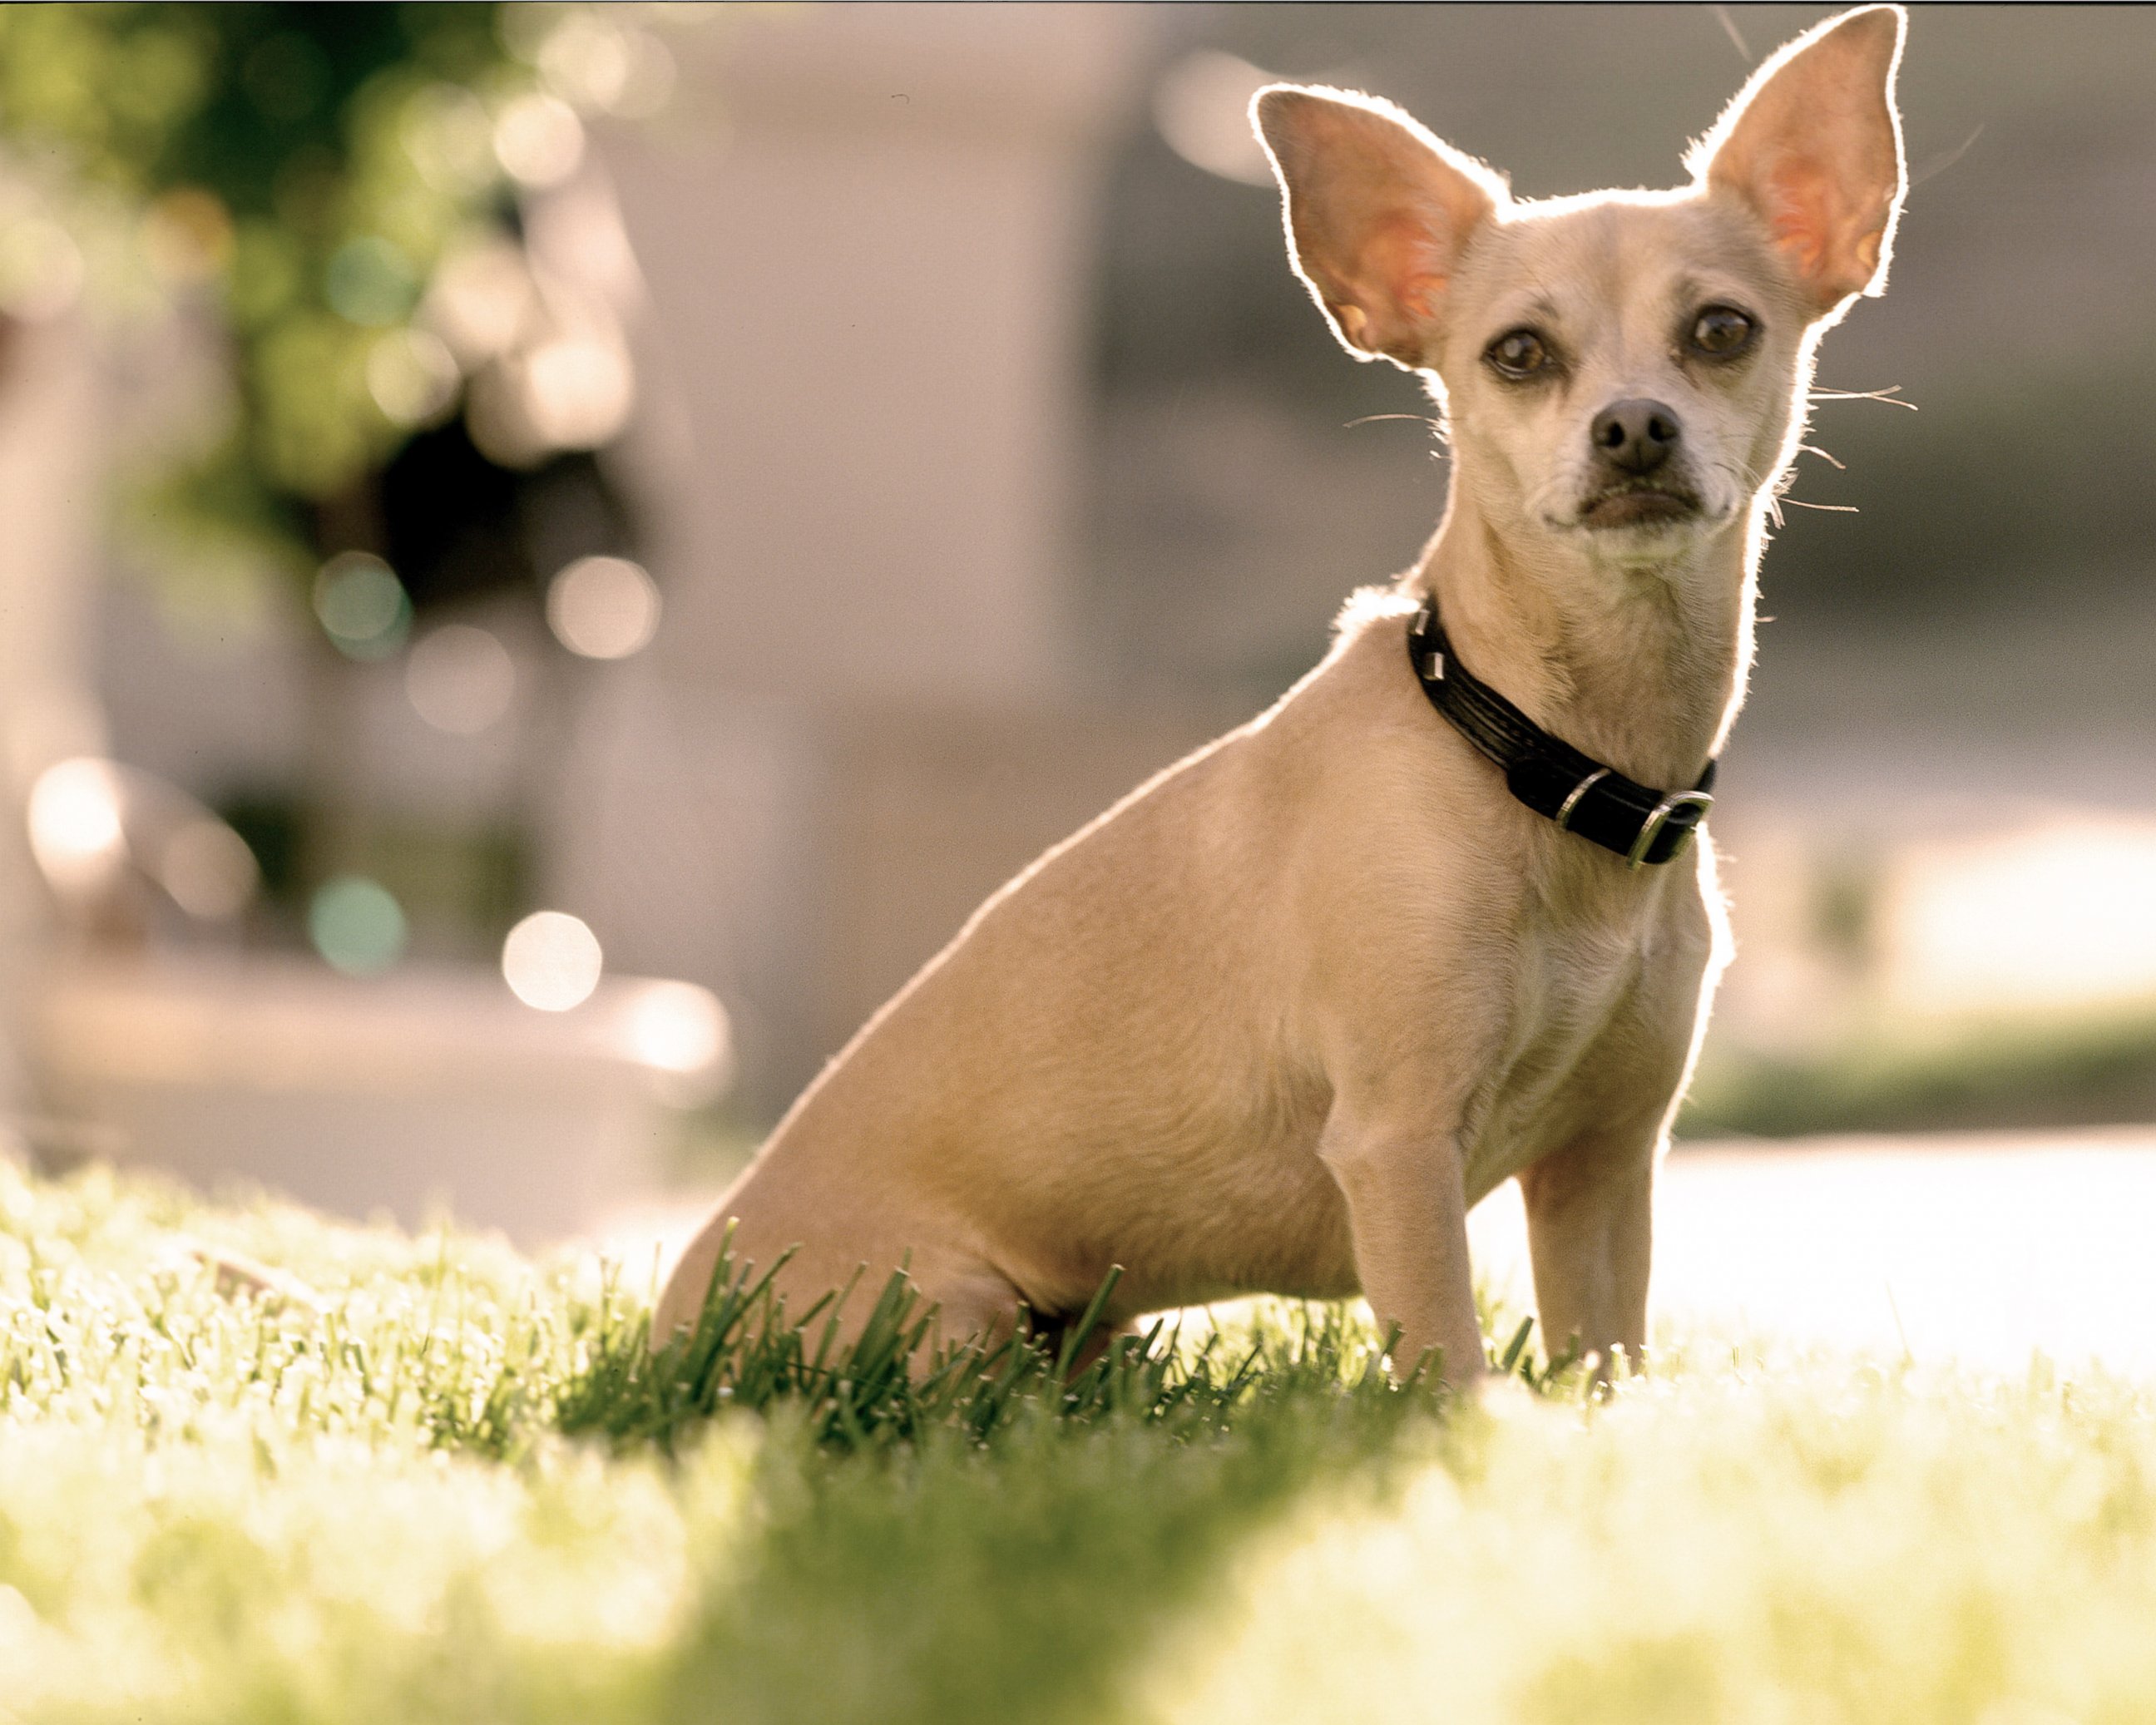 PHOTO: Gidget the Taco Bell dog during a photo session in October 1998 in Los Angeles, Calif.